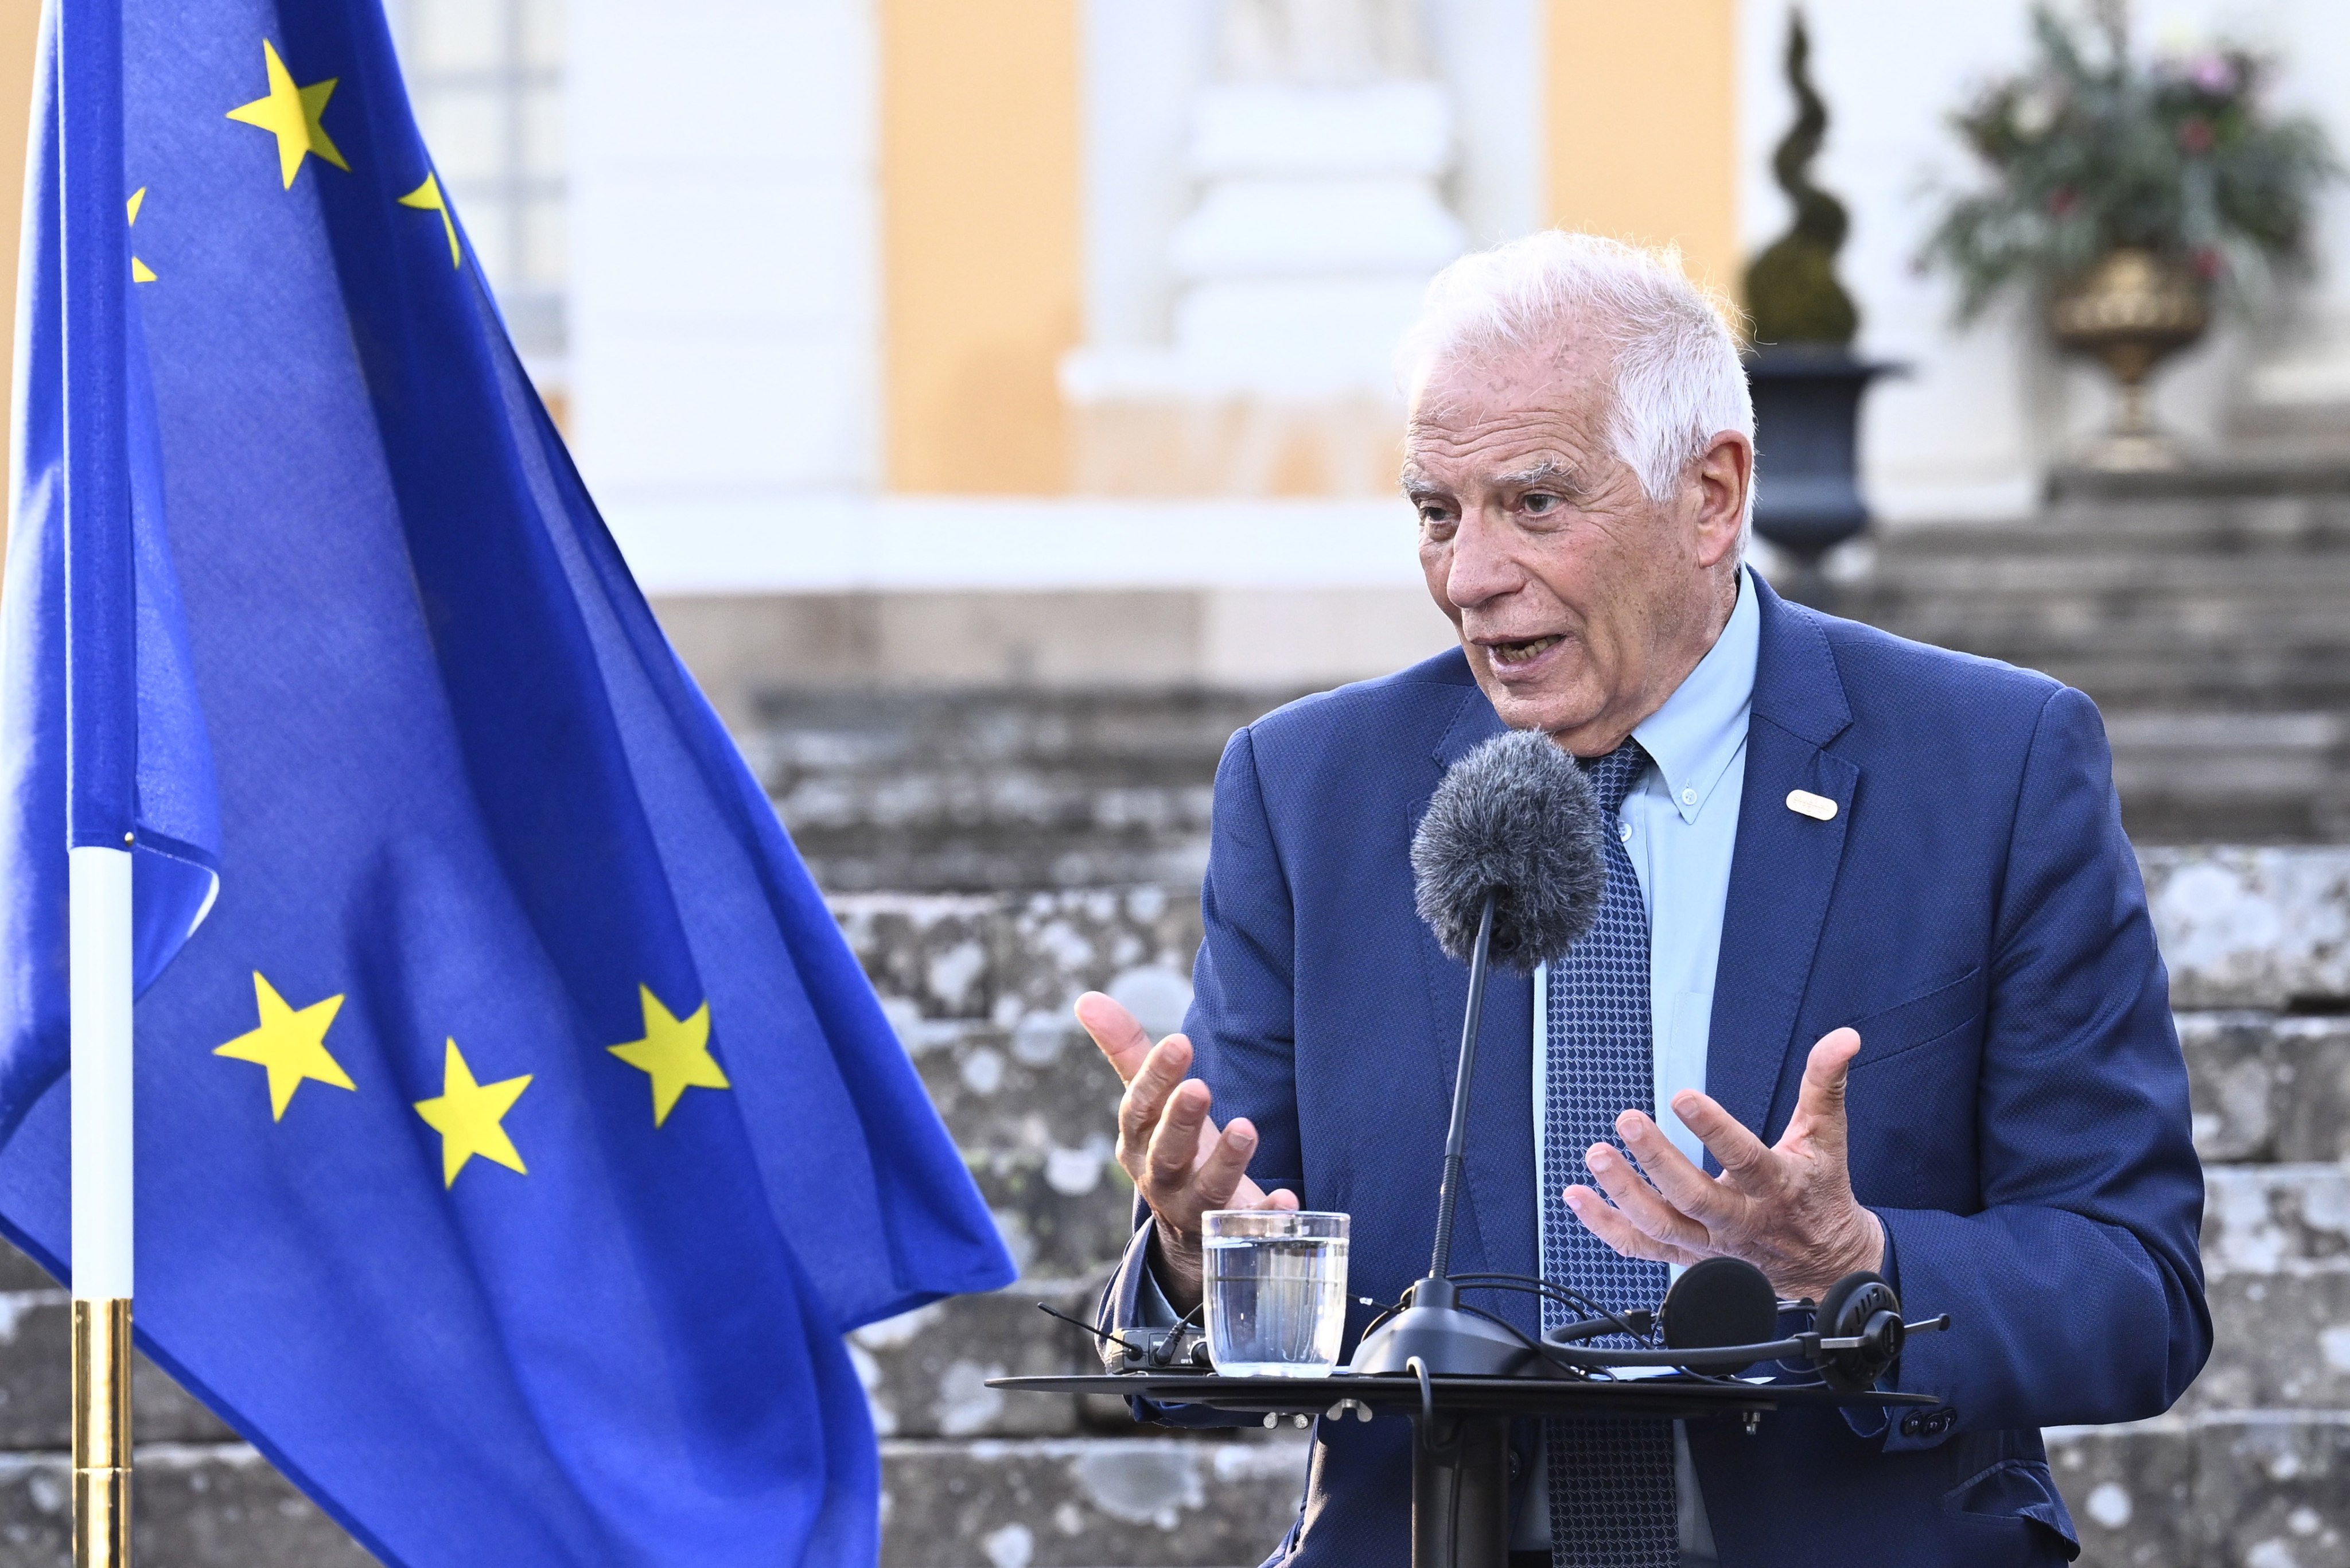 EU foreign policy chief Josep Borrell speaks during a press conference outside Marsta, Sweden, on Friday. Photo: EPA-EFE